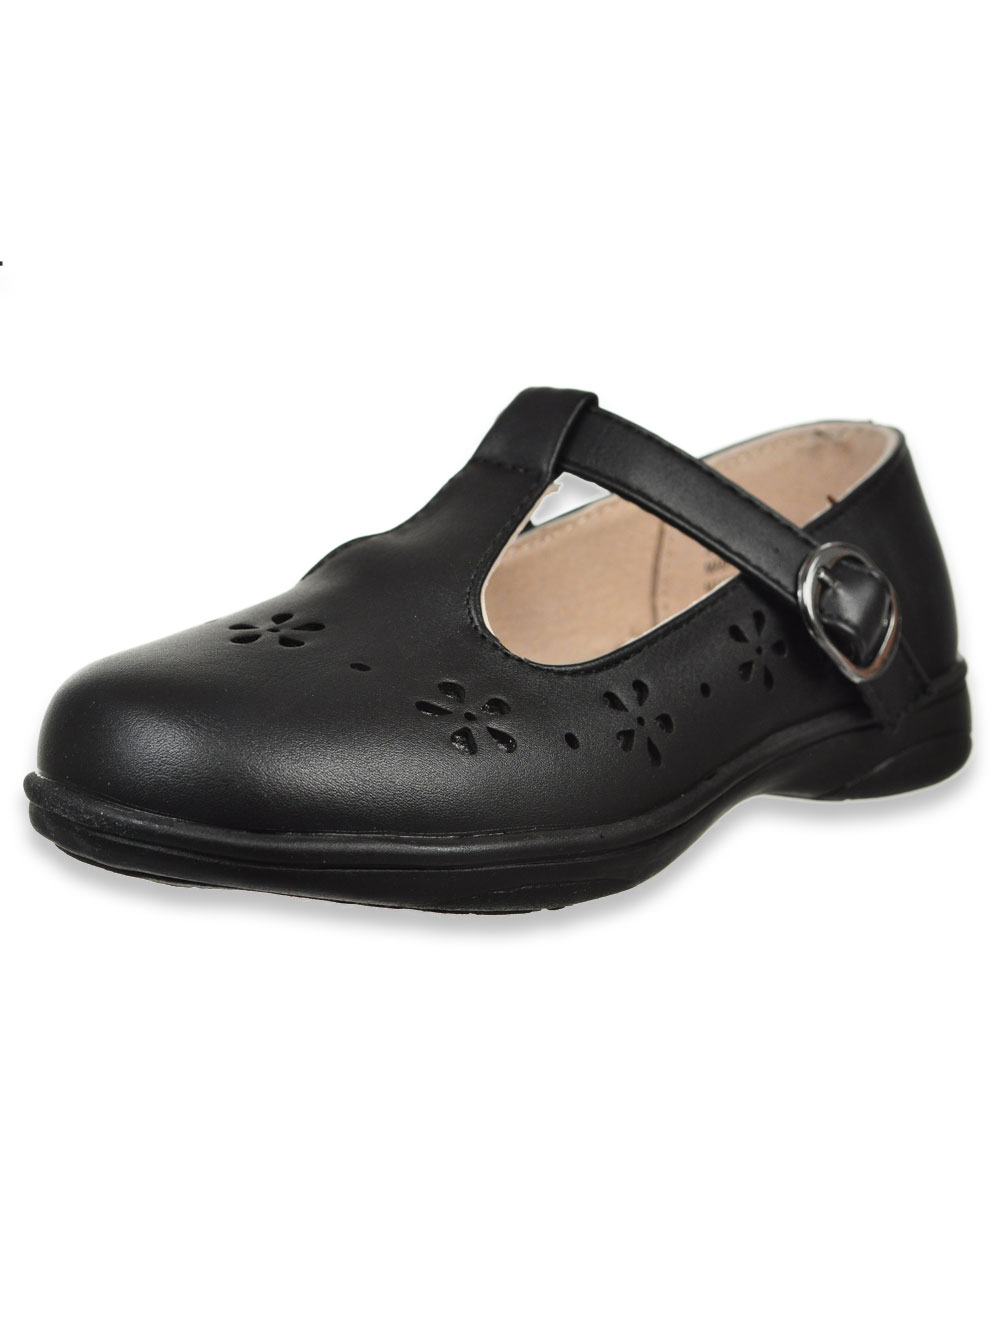 Girls' Buckled T-Strap Mary Janes